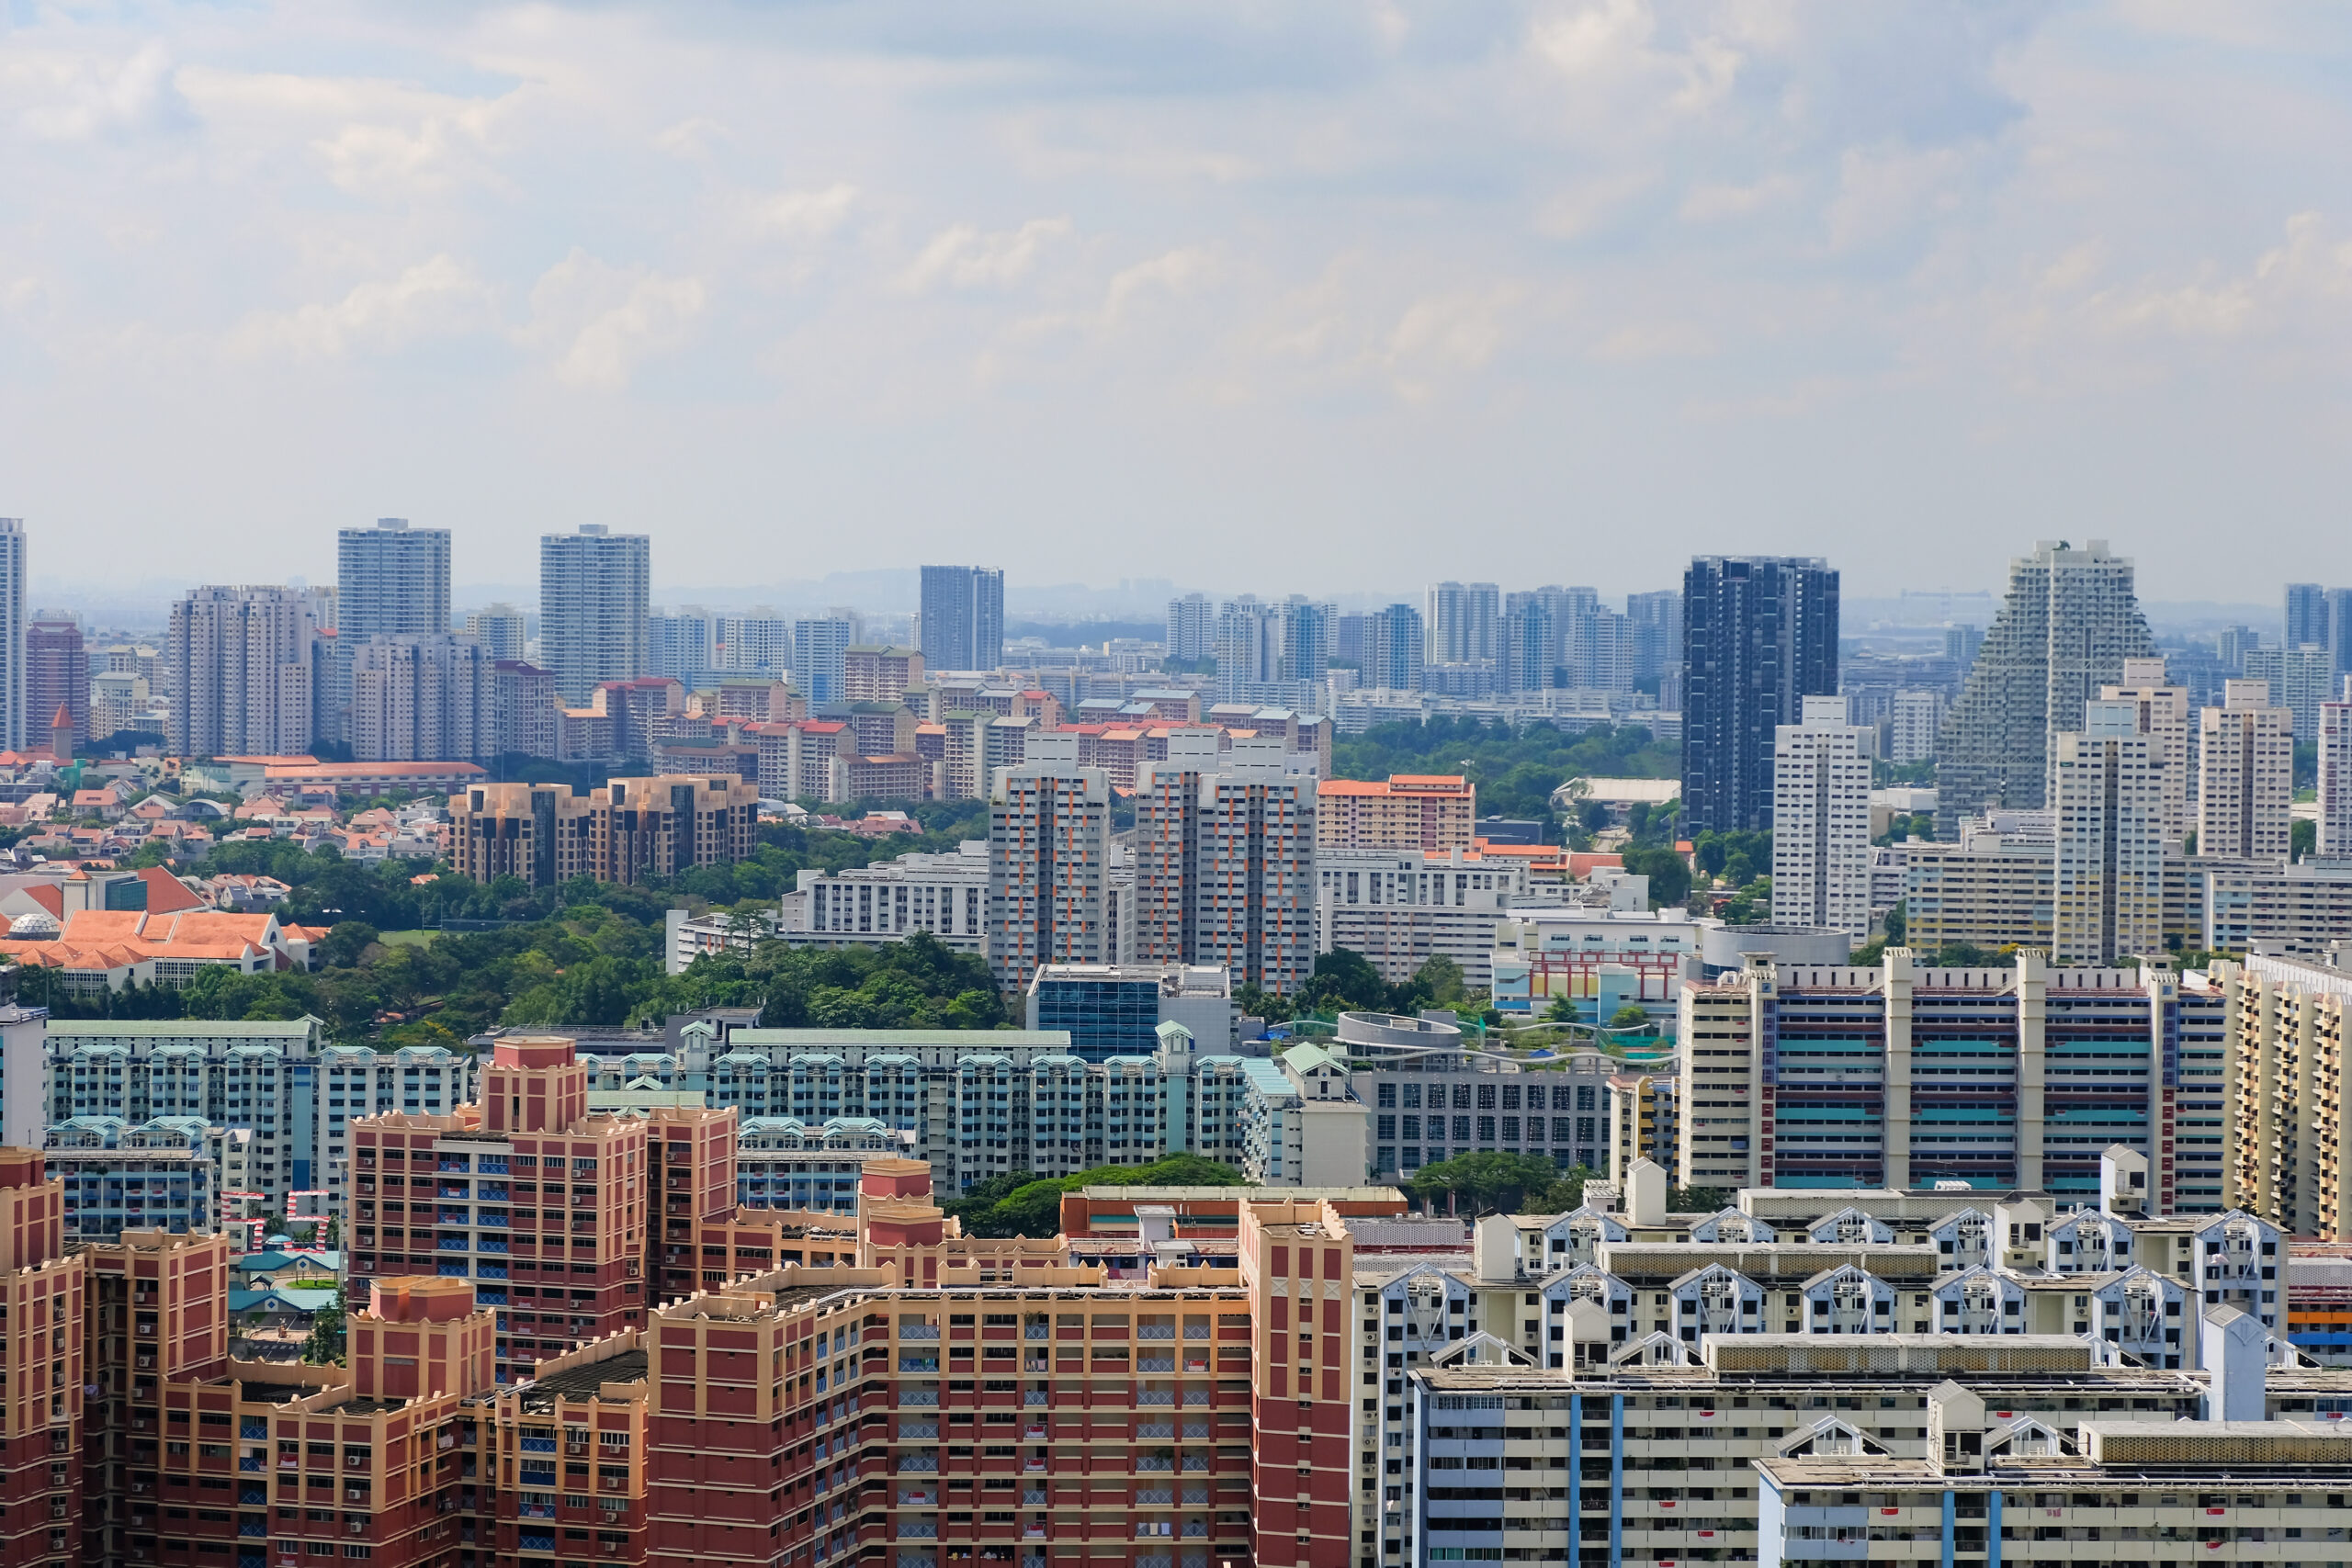 A bird’s eye view of the abundant HDB flats in Toa Payoh Central at daytime